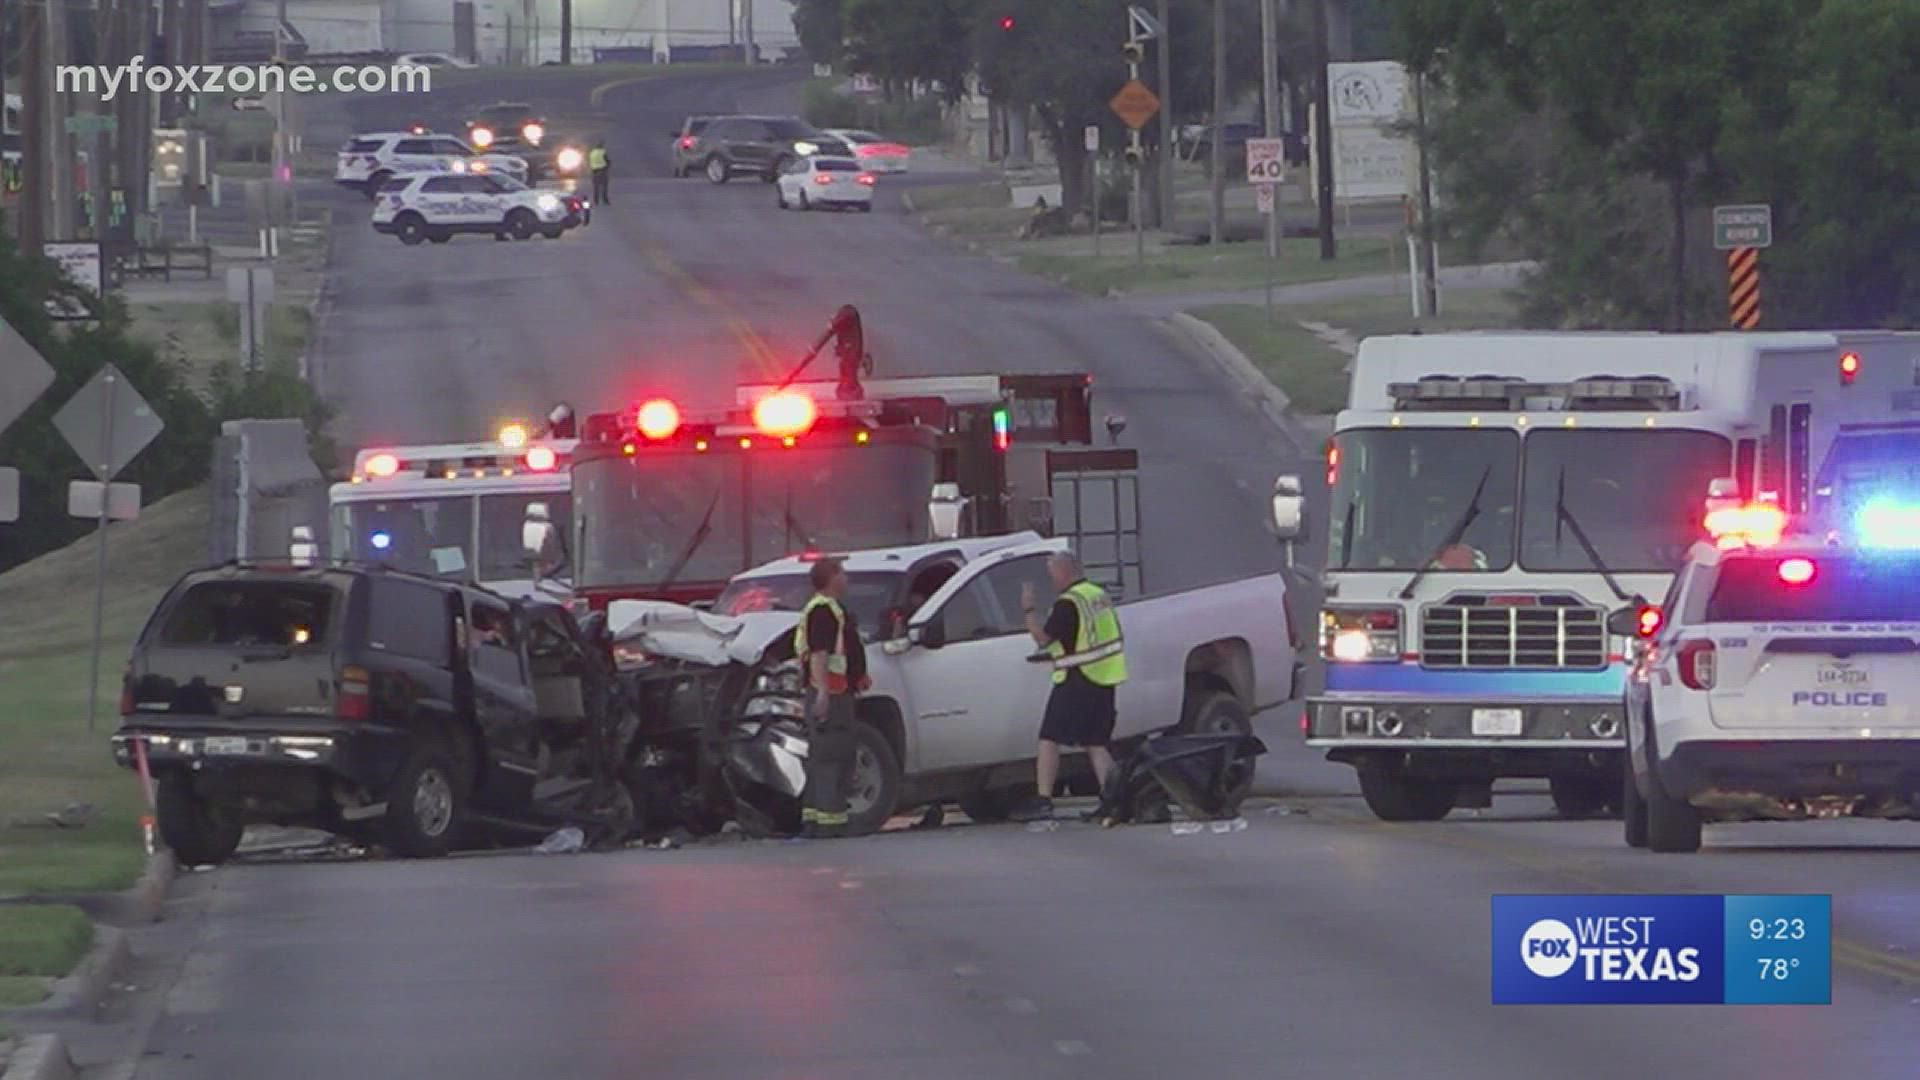 Two vehicles, with seven total occupants, hit head-on Tuesday evening, killing one person and injuring six others.